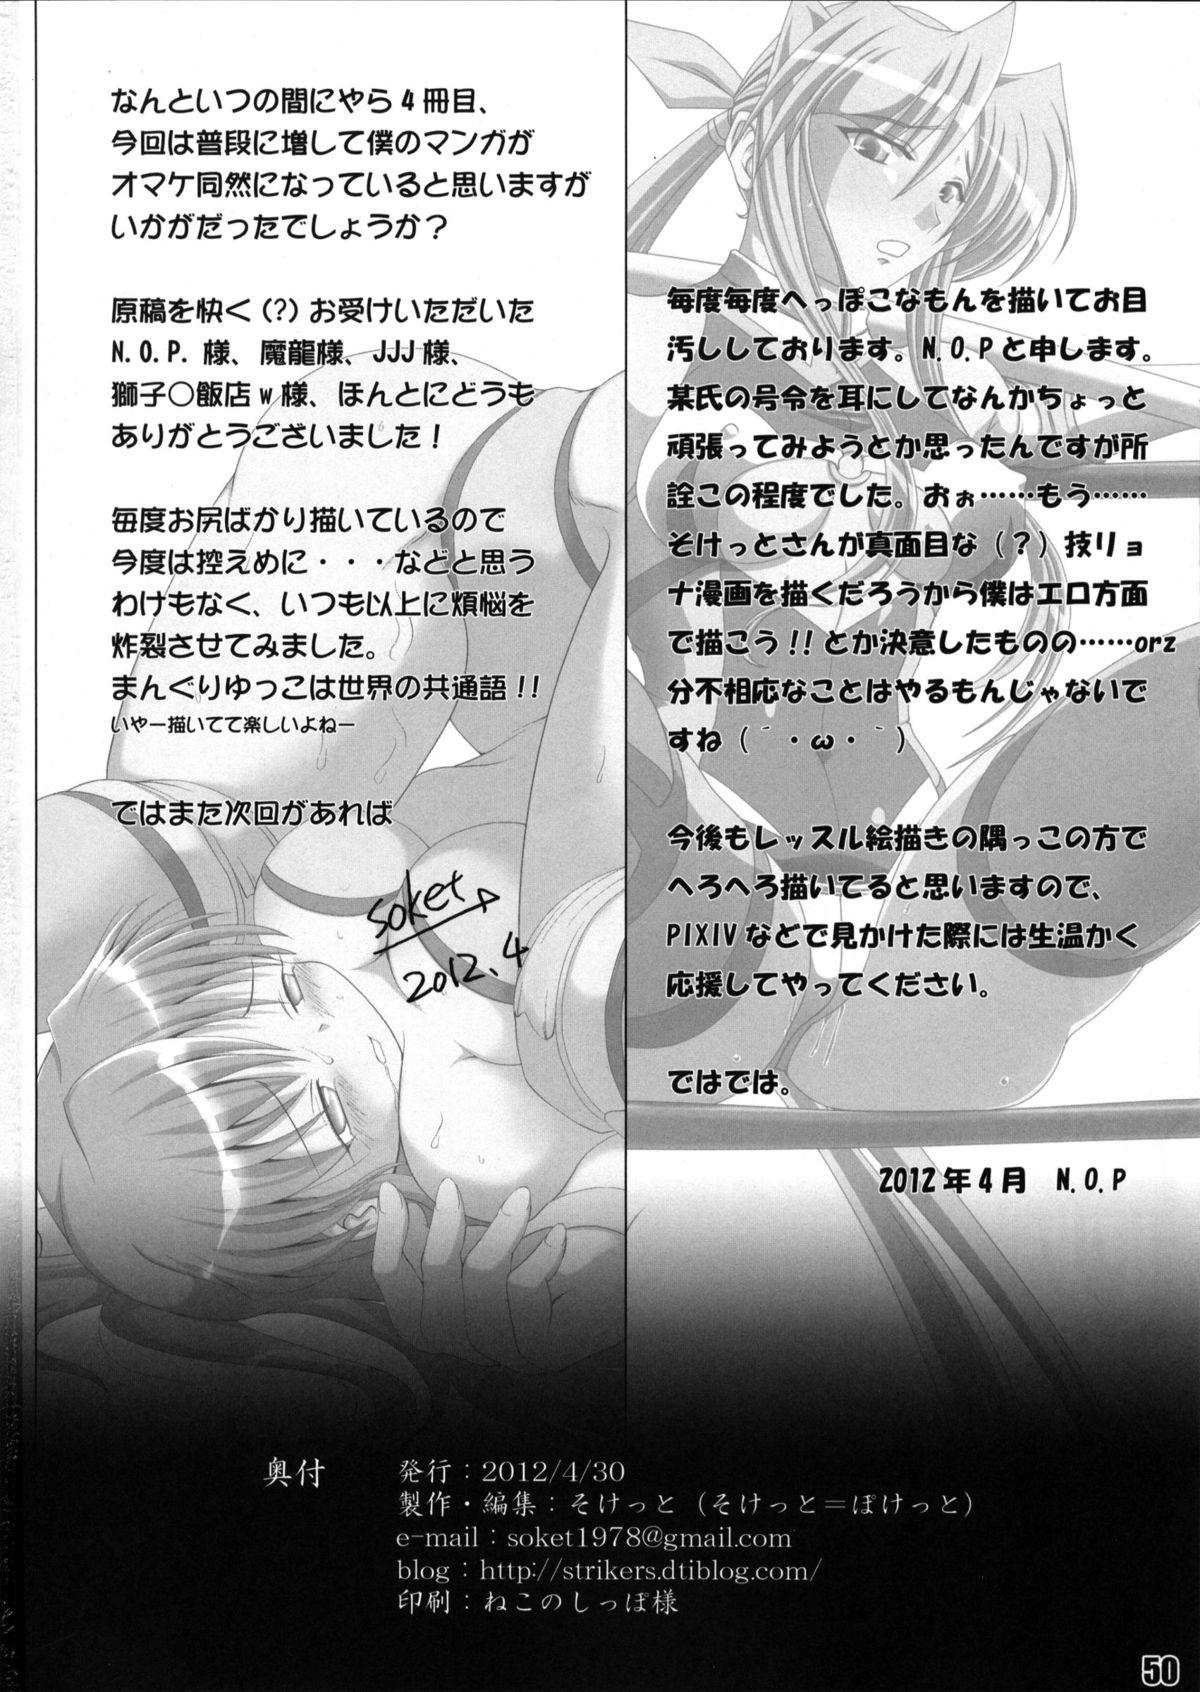 Alone FALLIN' ANGELS4 - Wrestle angels Buttfucking - Page 49